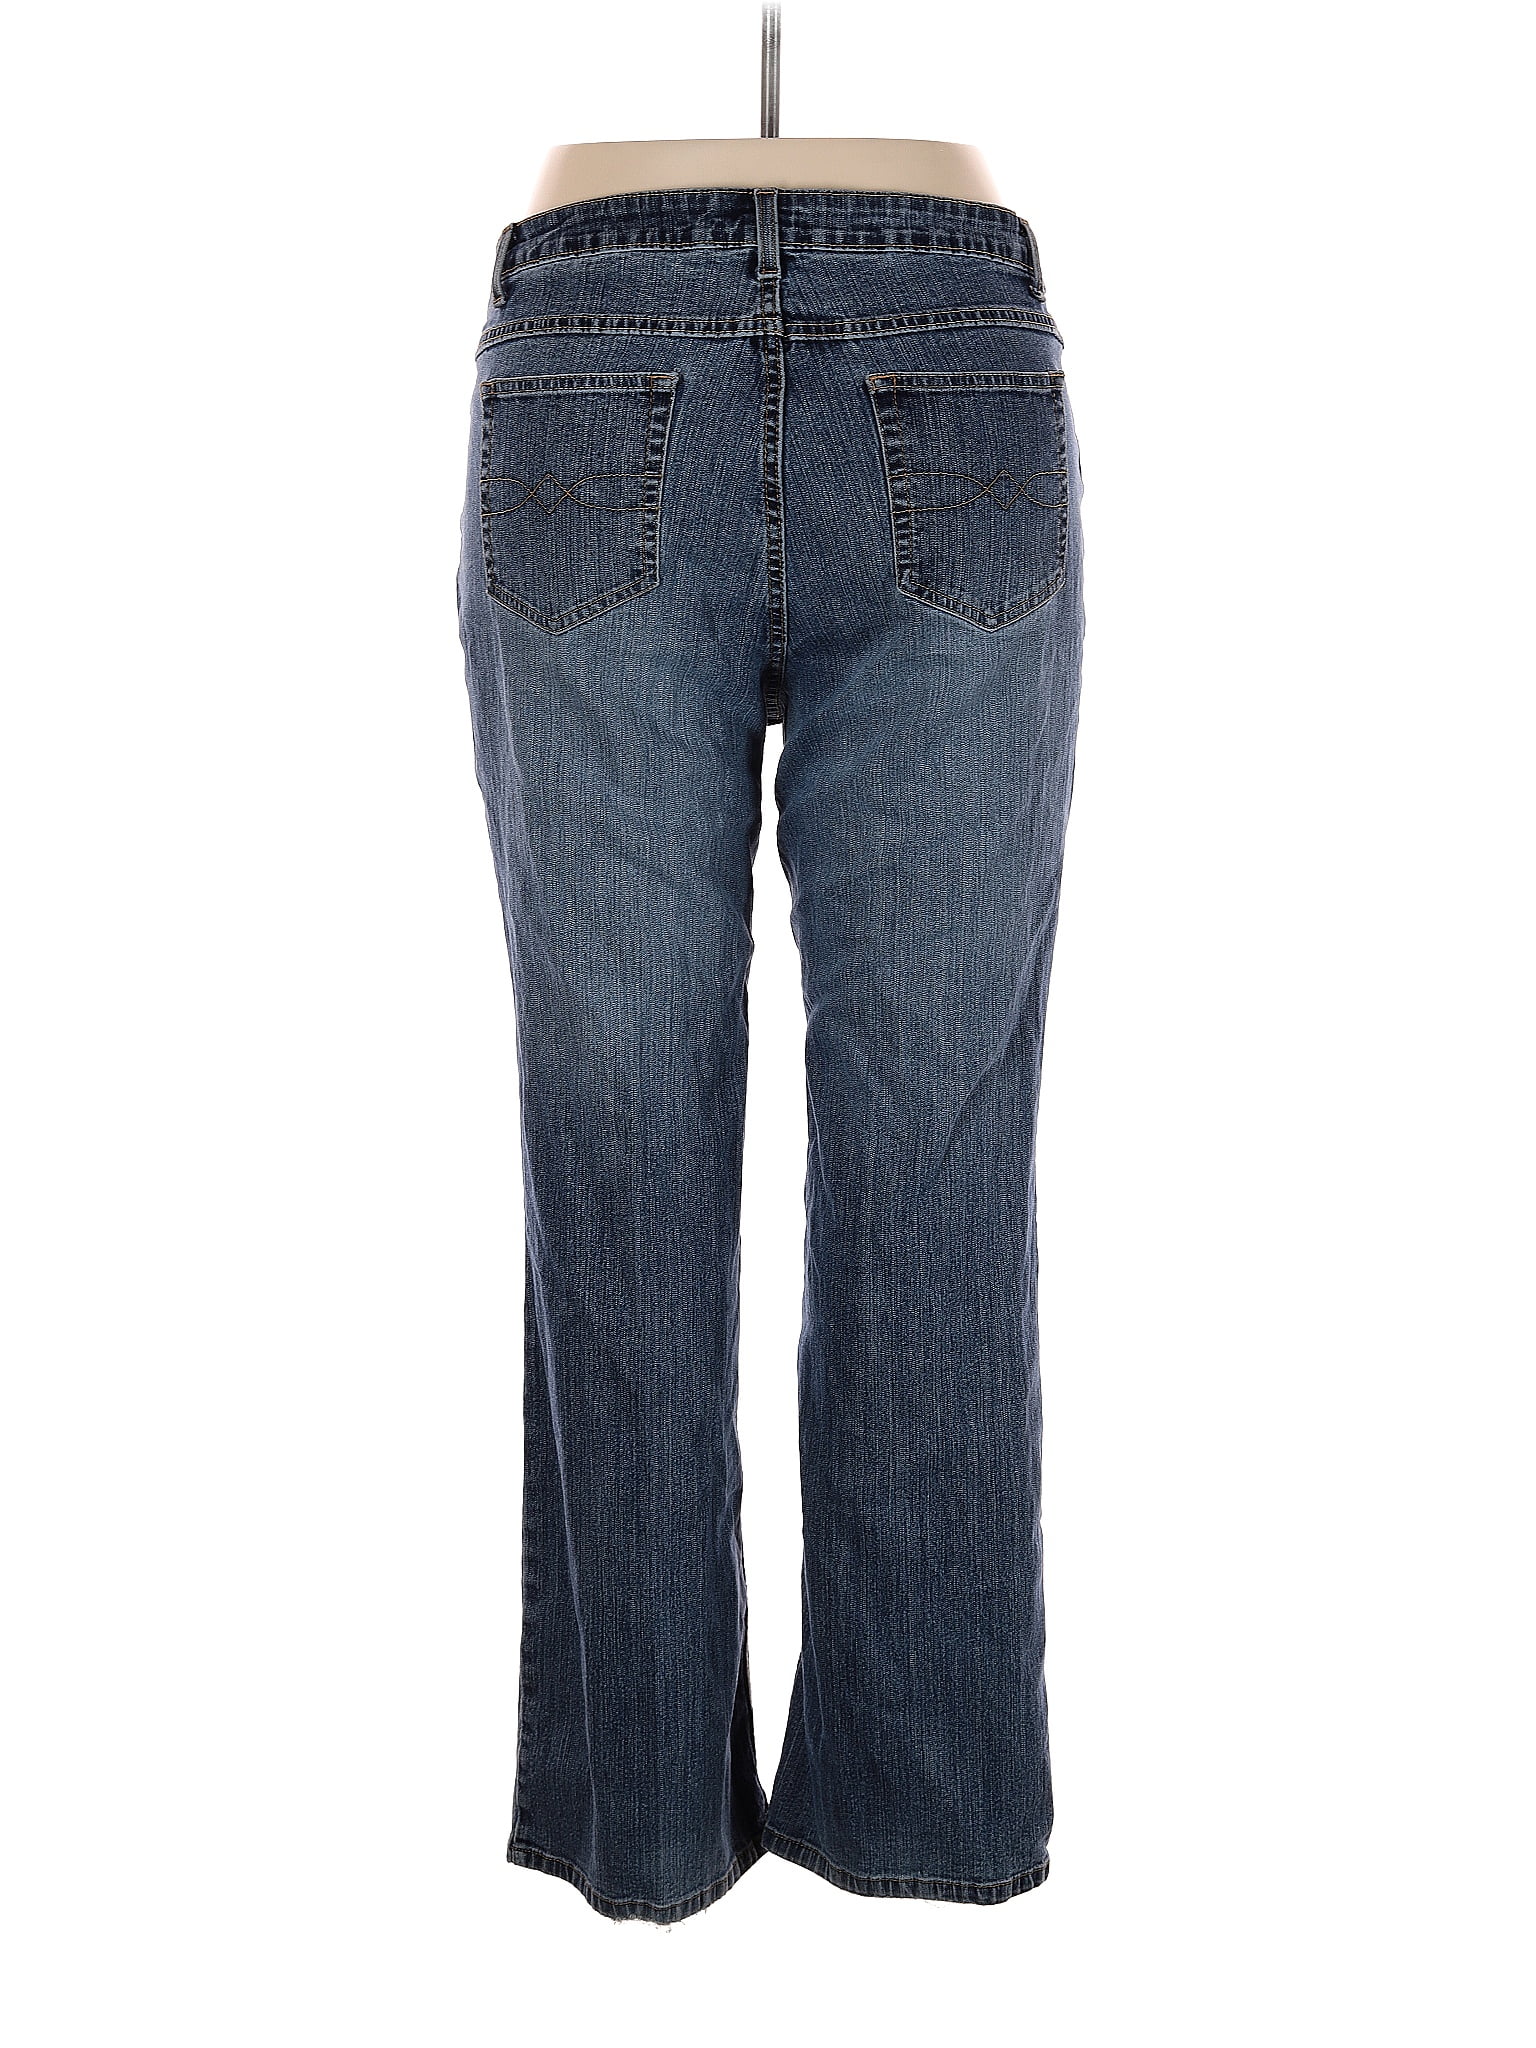 Faded Glory 100% Cotton Solid Blue Jeans Size 14 - 32% off